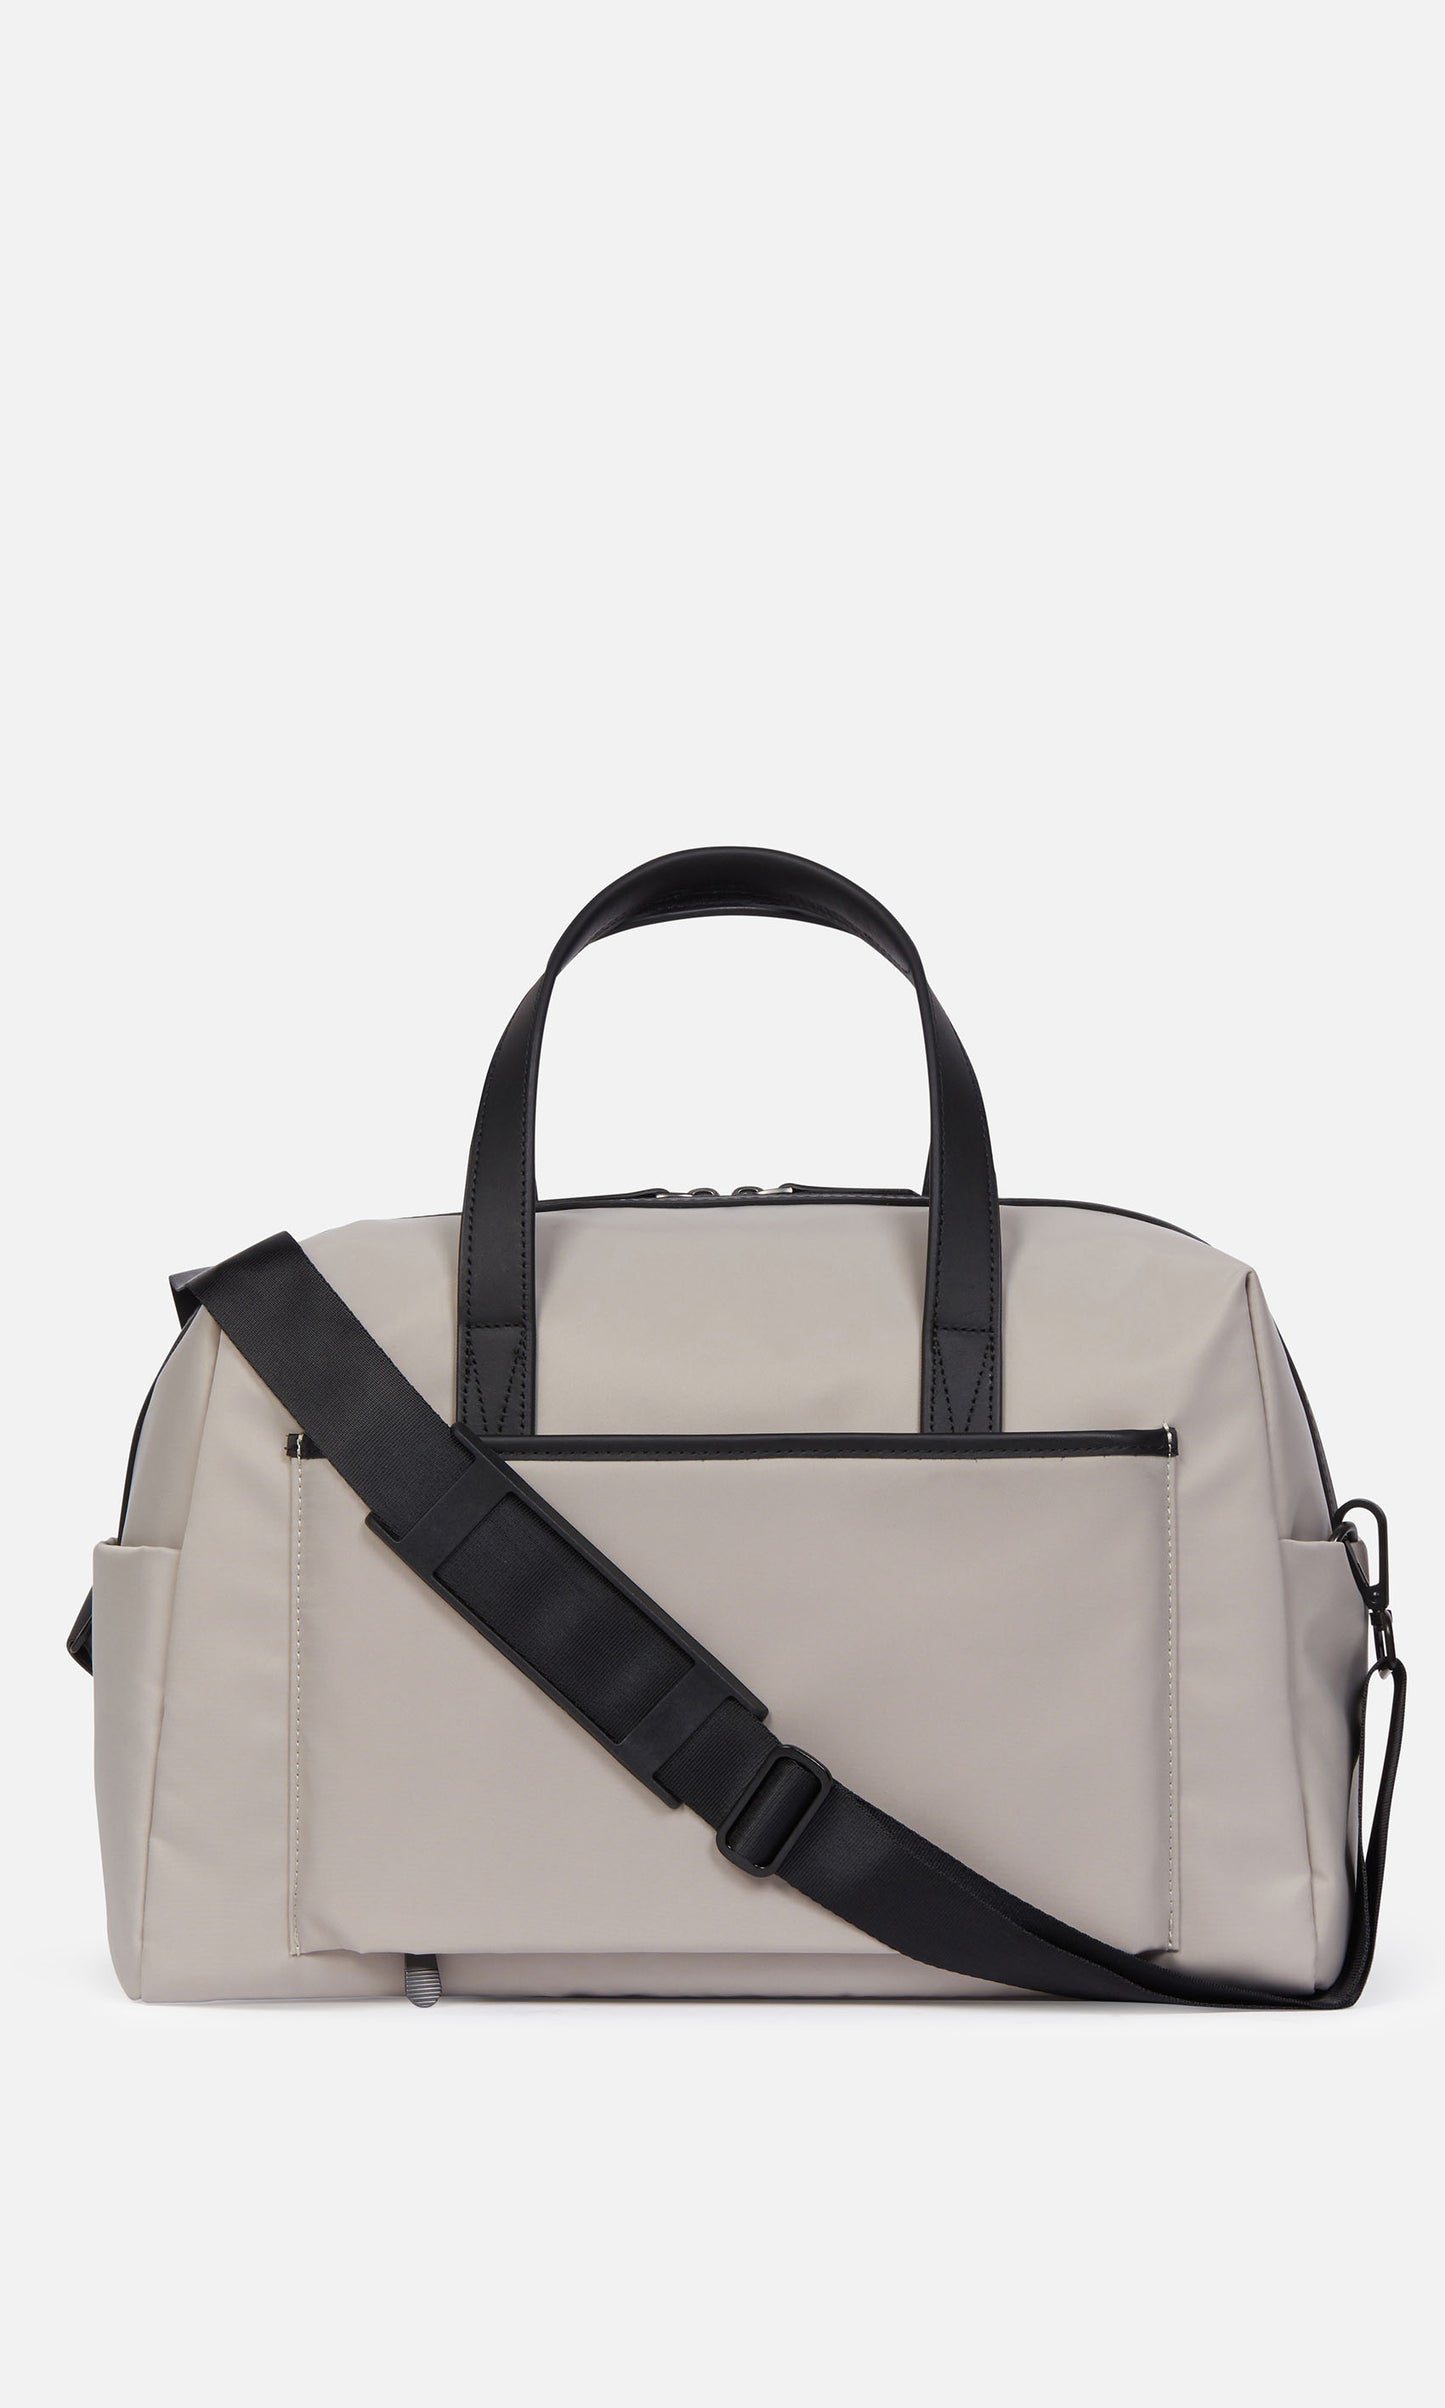 Chelsea Overnight Bag in Taupe